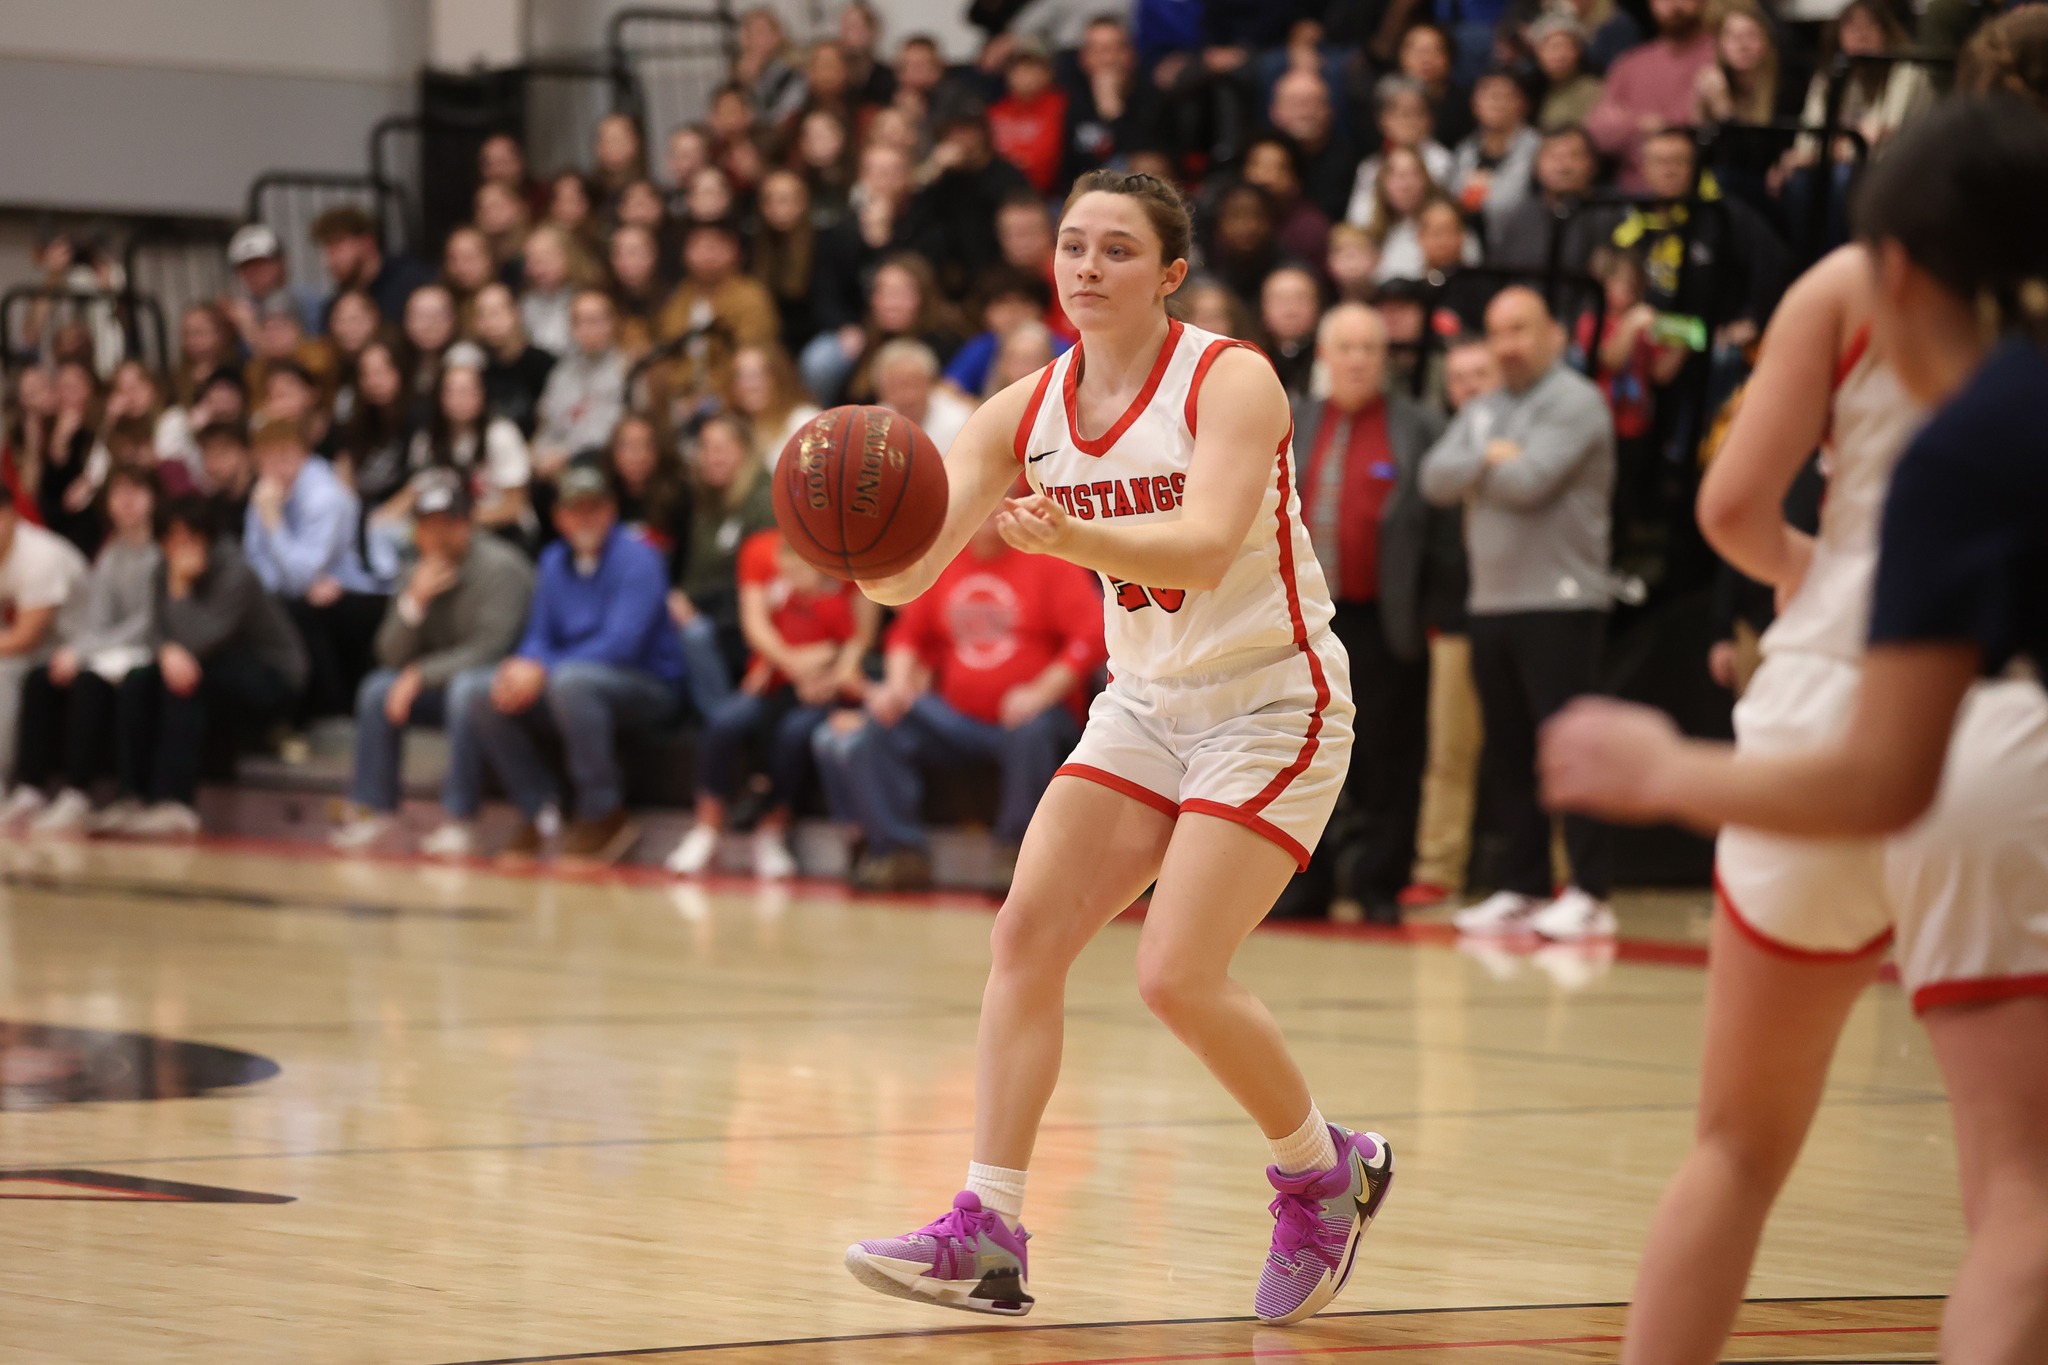 Women's Basketball conquers Knights in convincing fashion